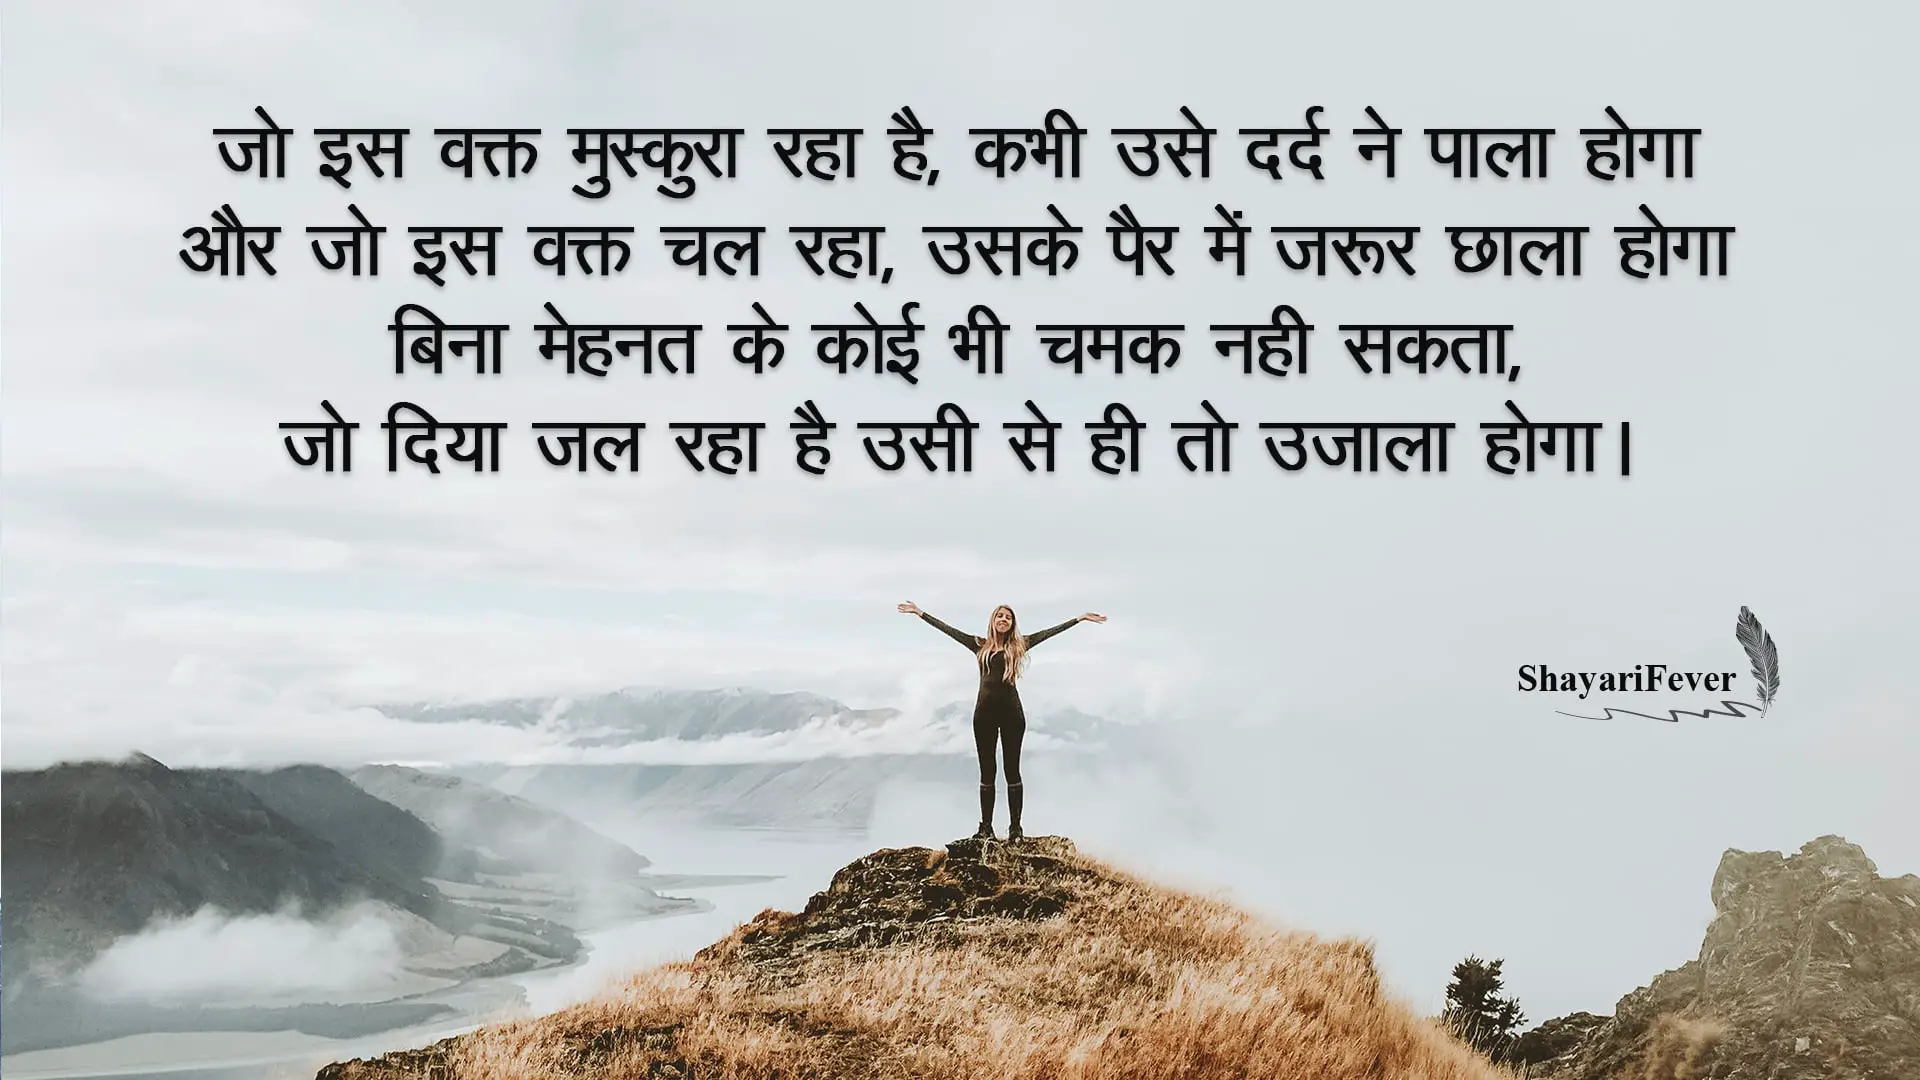 Life Inspirational Quotes In Hindi